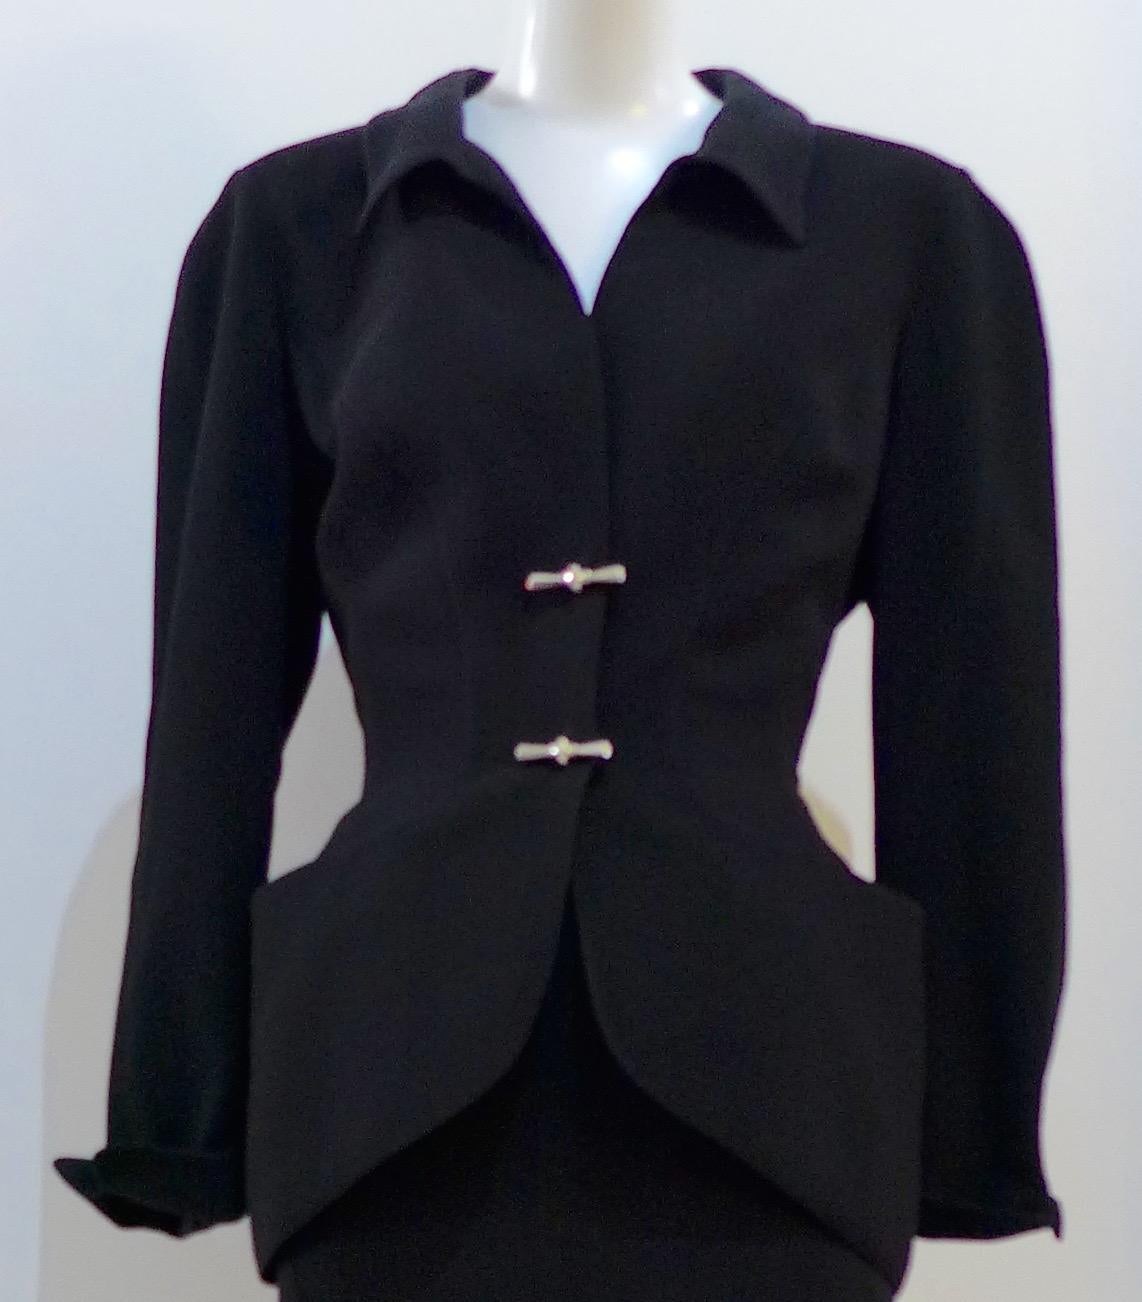 This THIERRY MUGLER skirt suit is composed of a black polyester fabric. Features a classic Mugler silhouette with nipped waist and curved bust-line to neckline design. The jacket has front snap closures, rounded shoulders, and silver and rhinestone